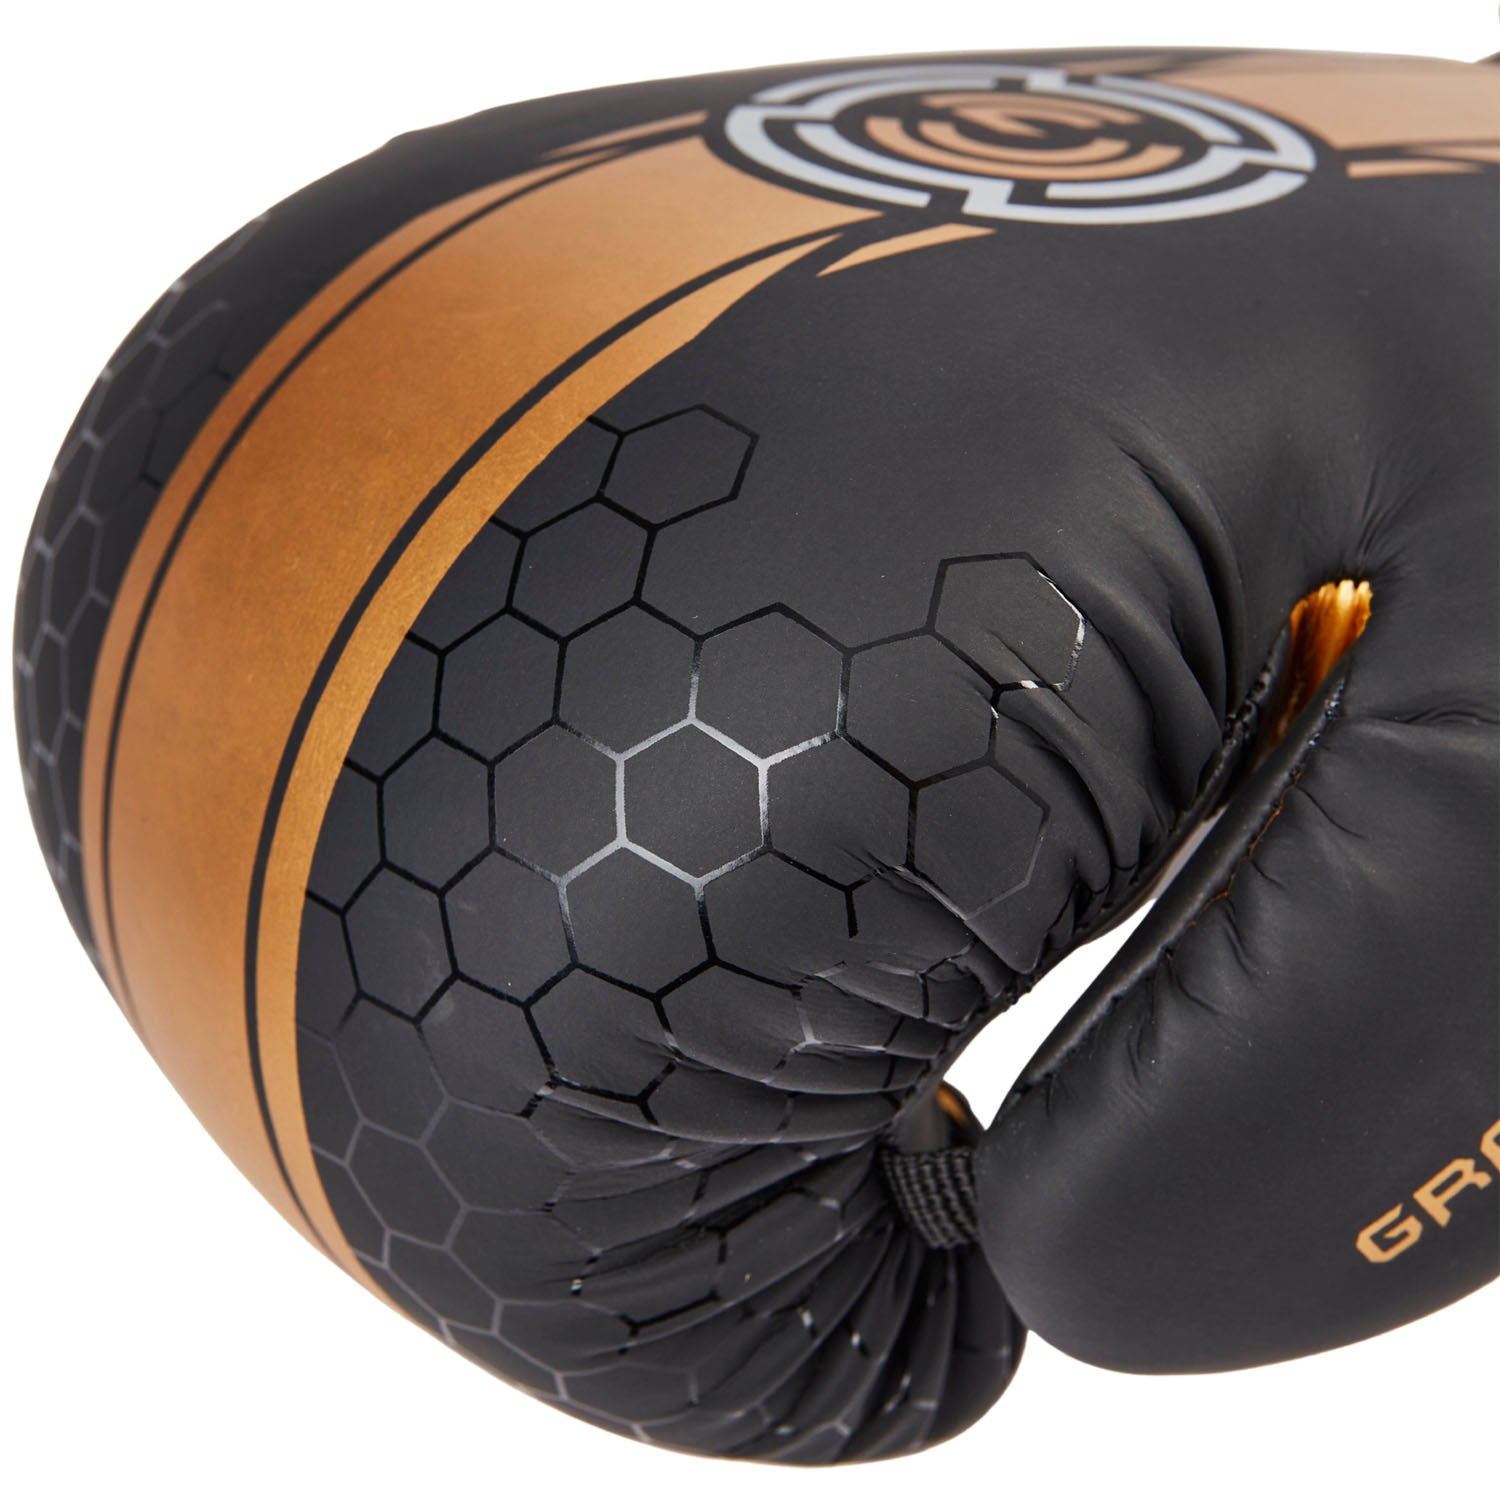 Which Boxing Gloves Are Best For Bag Work?